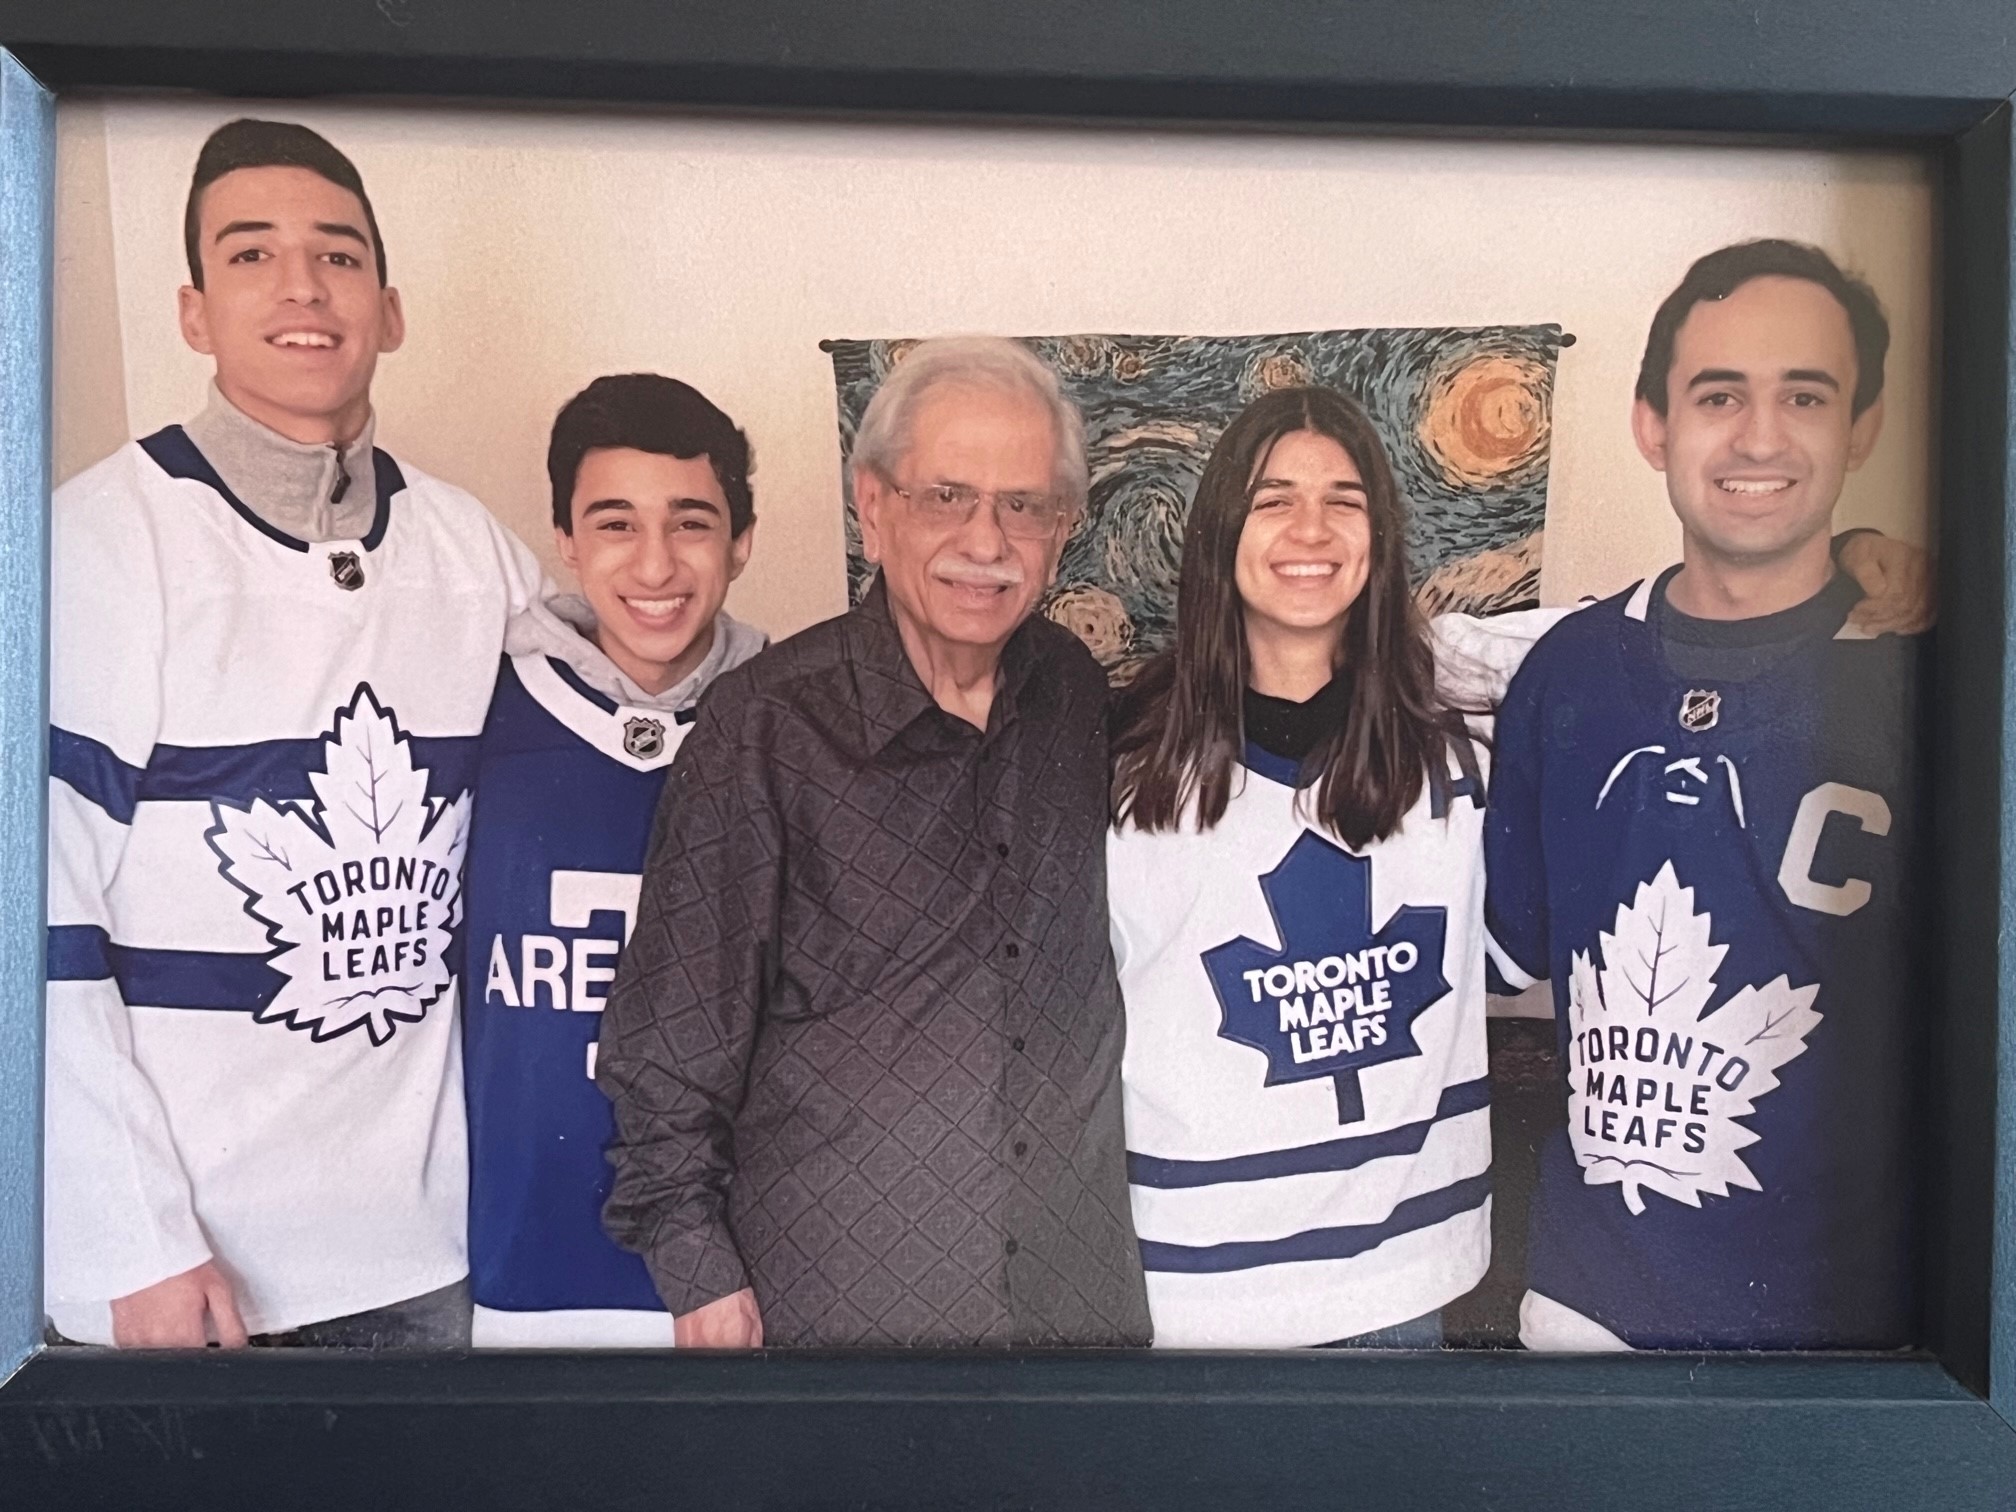 Nari stands with his grandchildren, who are wearing hockey jerseys and smiling bright. 